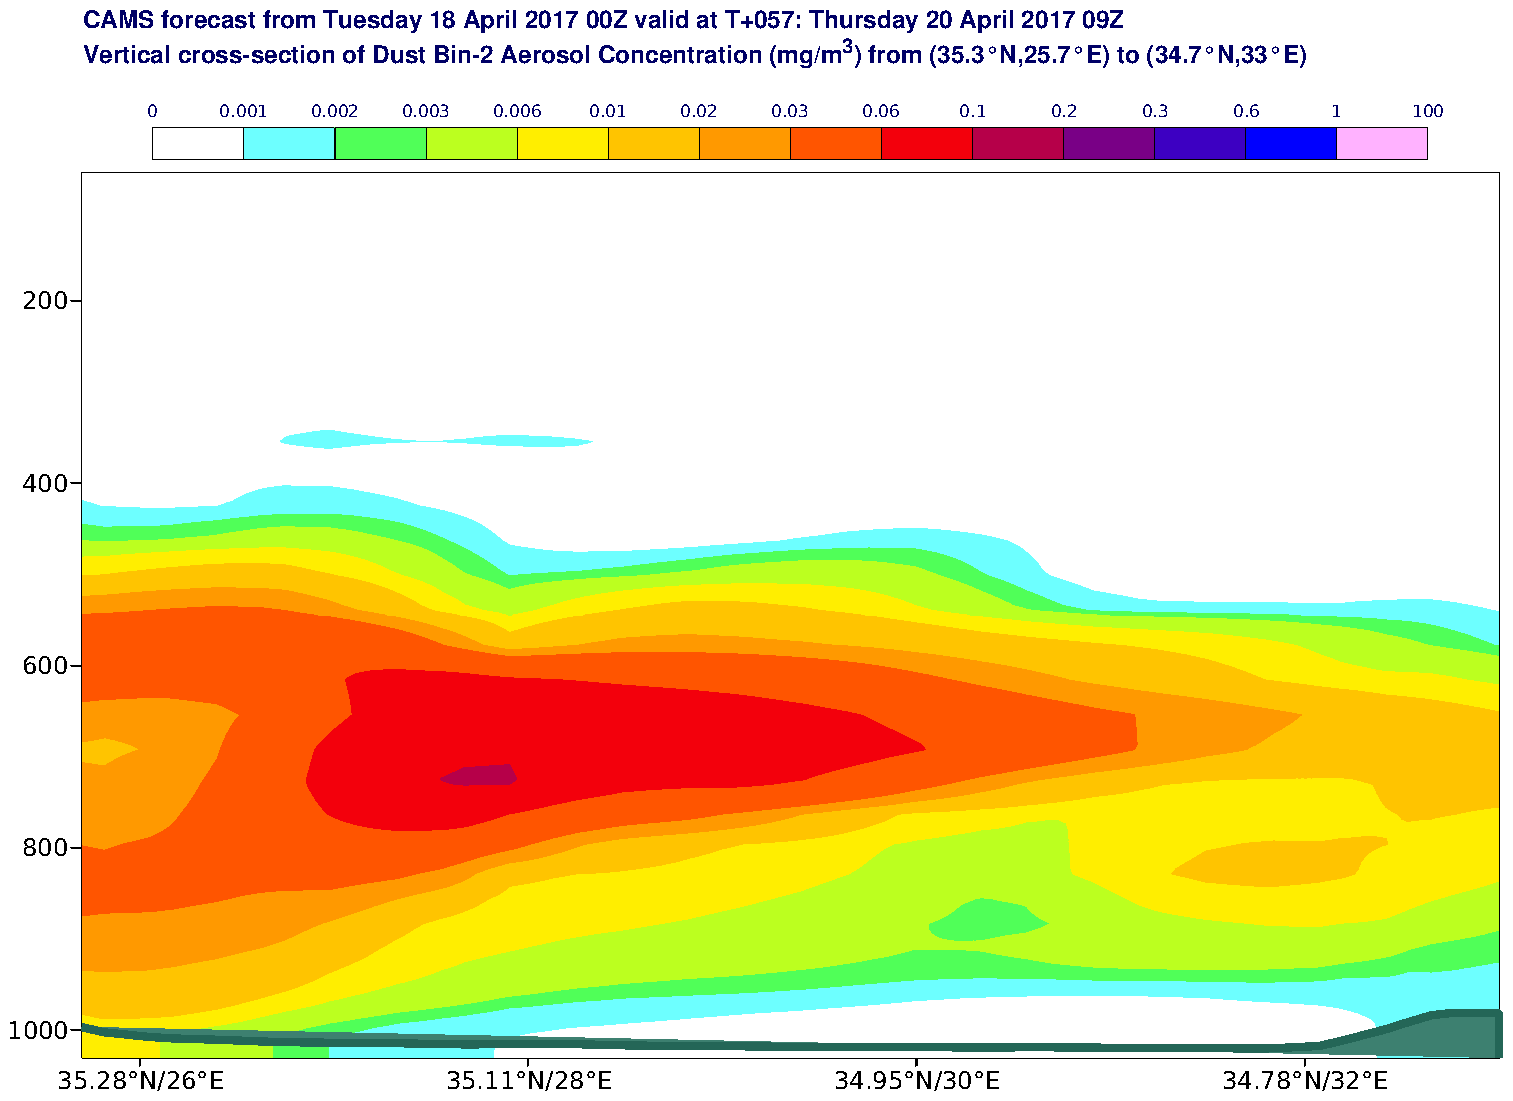 Vertical cross-section of Dust Bin-2 Aerosol Concentration (mg/m3) valid at T57 - 2017-04-20 09:00